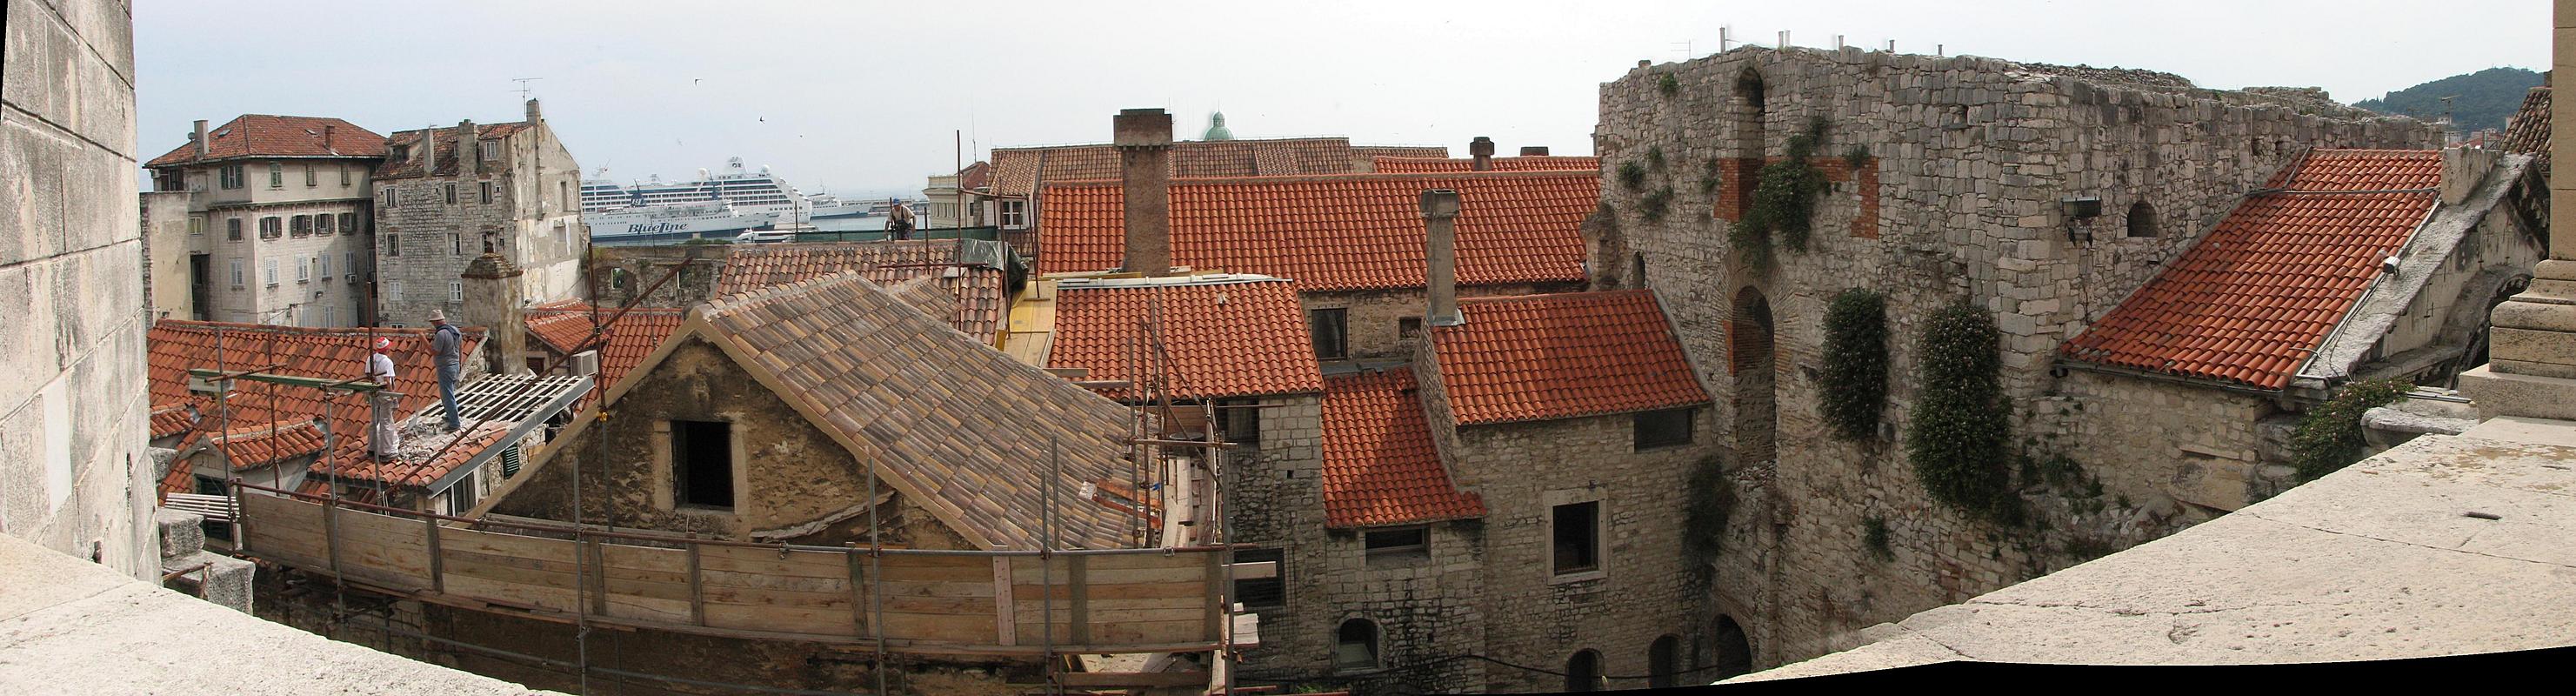 Roofs of Diocletian's Palace